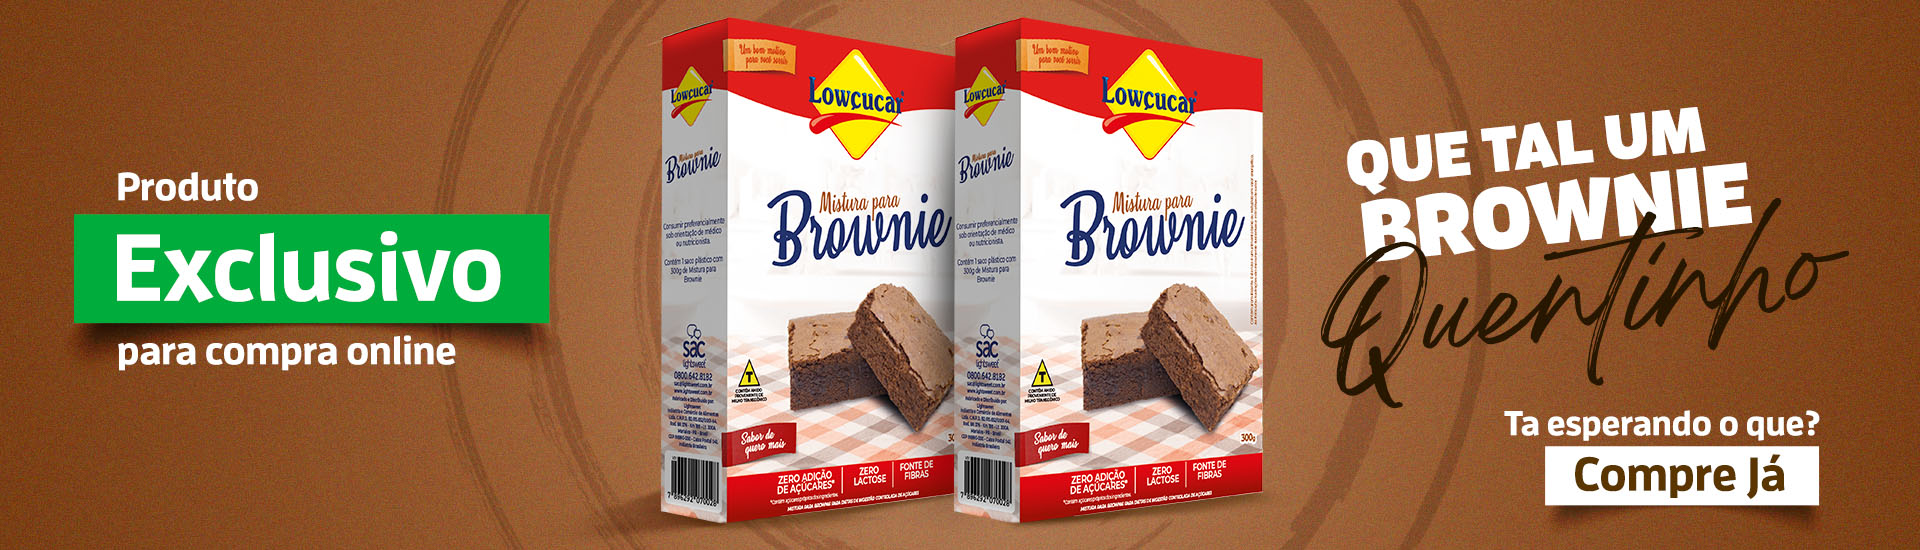 Exclusivo Brownie 10/01 a 14/01